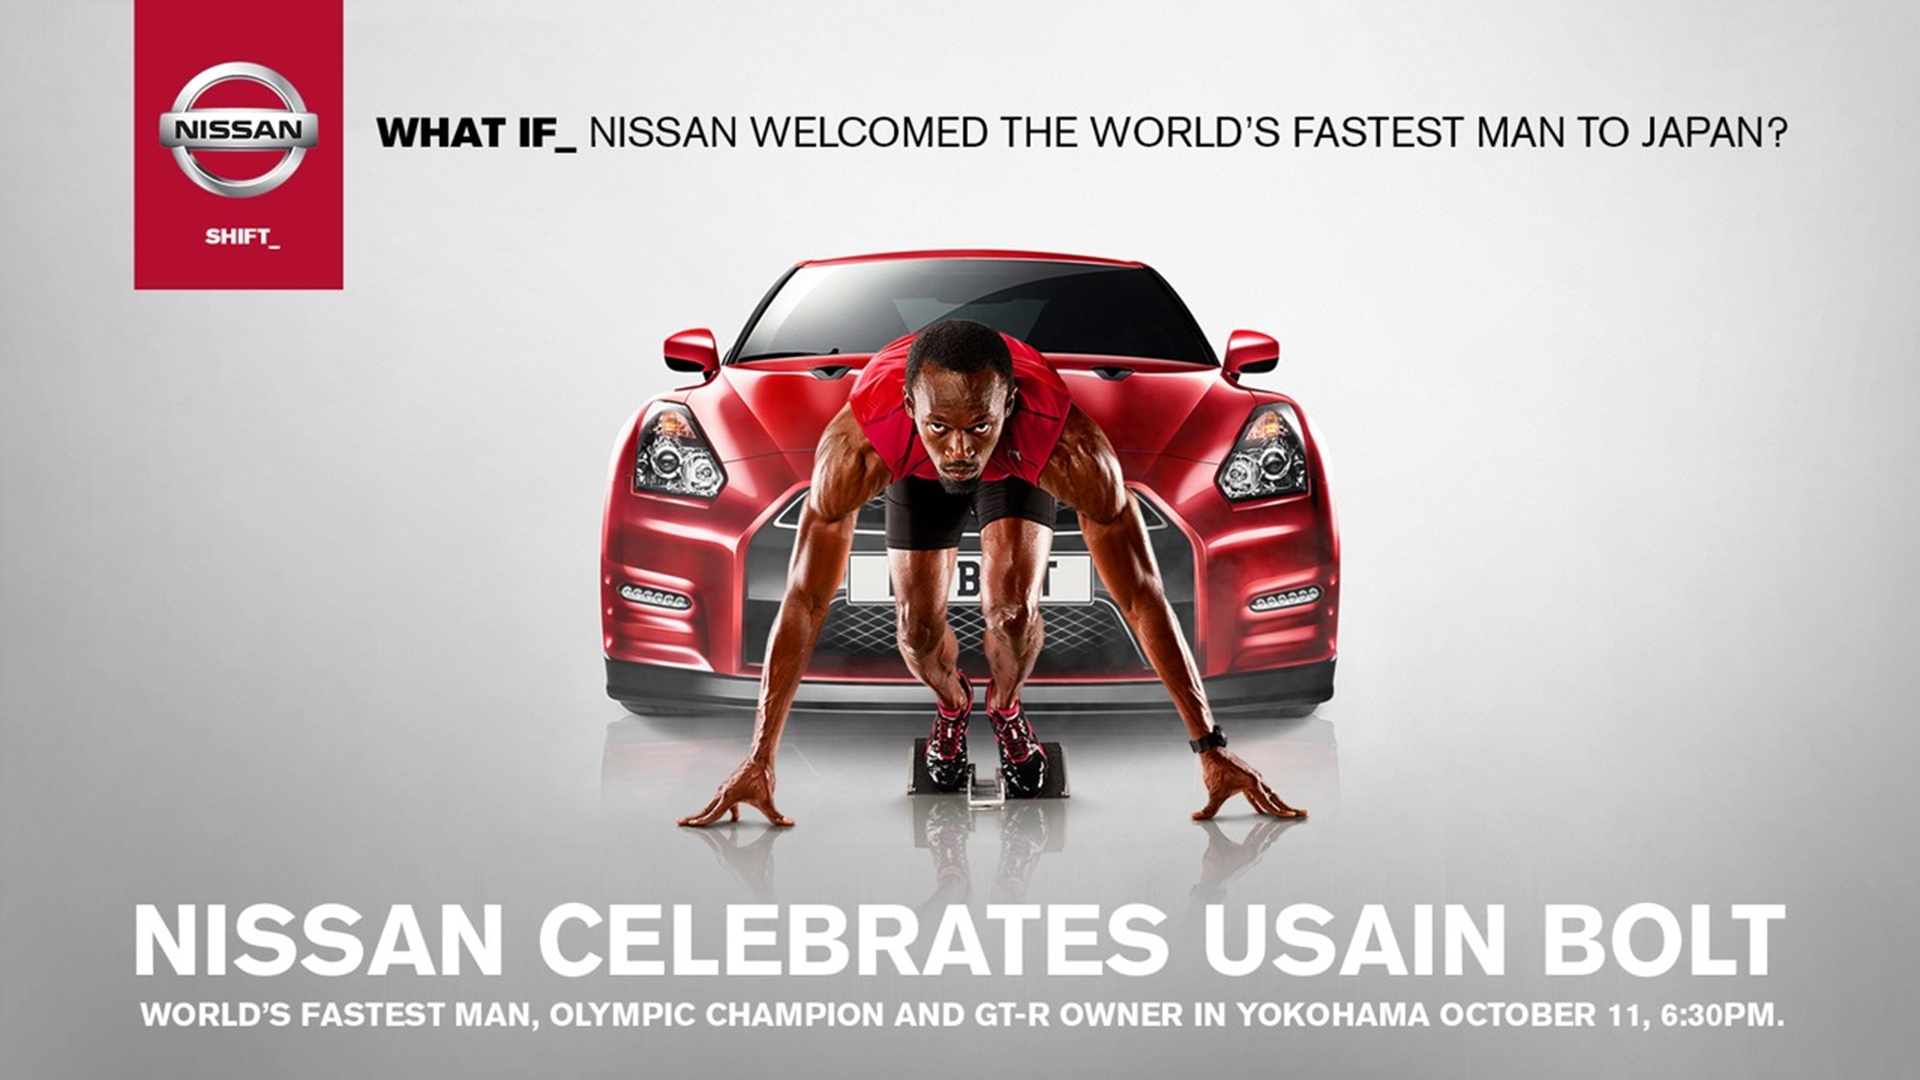 Usain Bolt “Goes for Gold” with Nissan